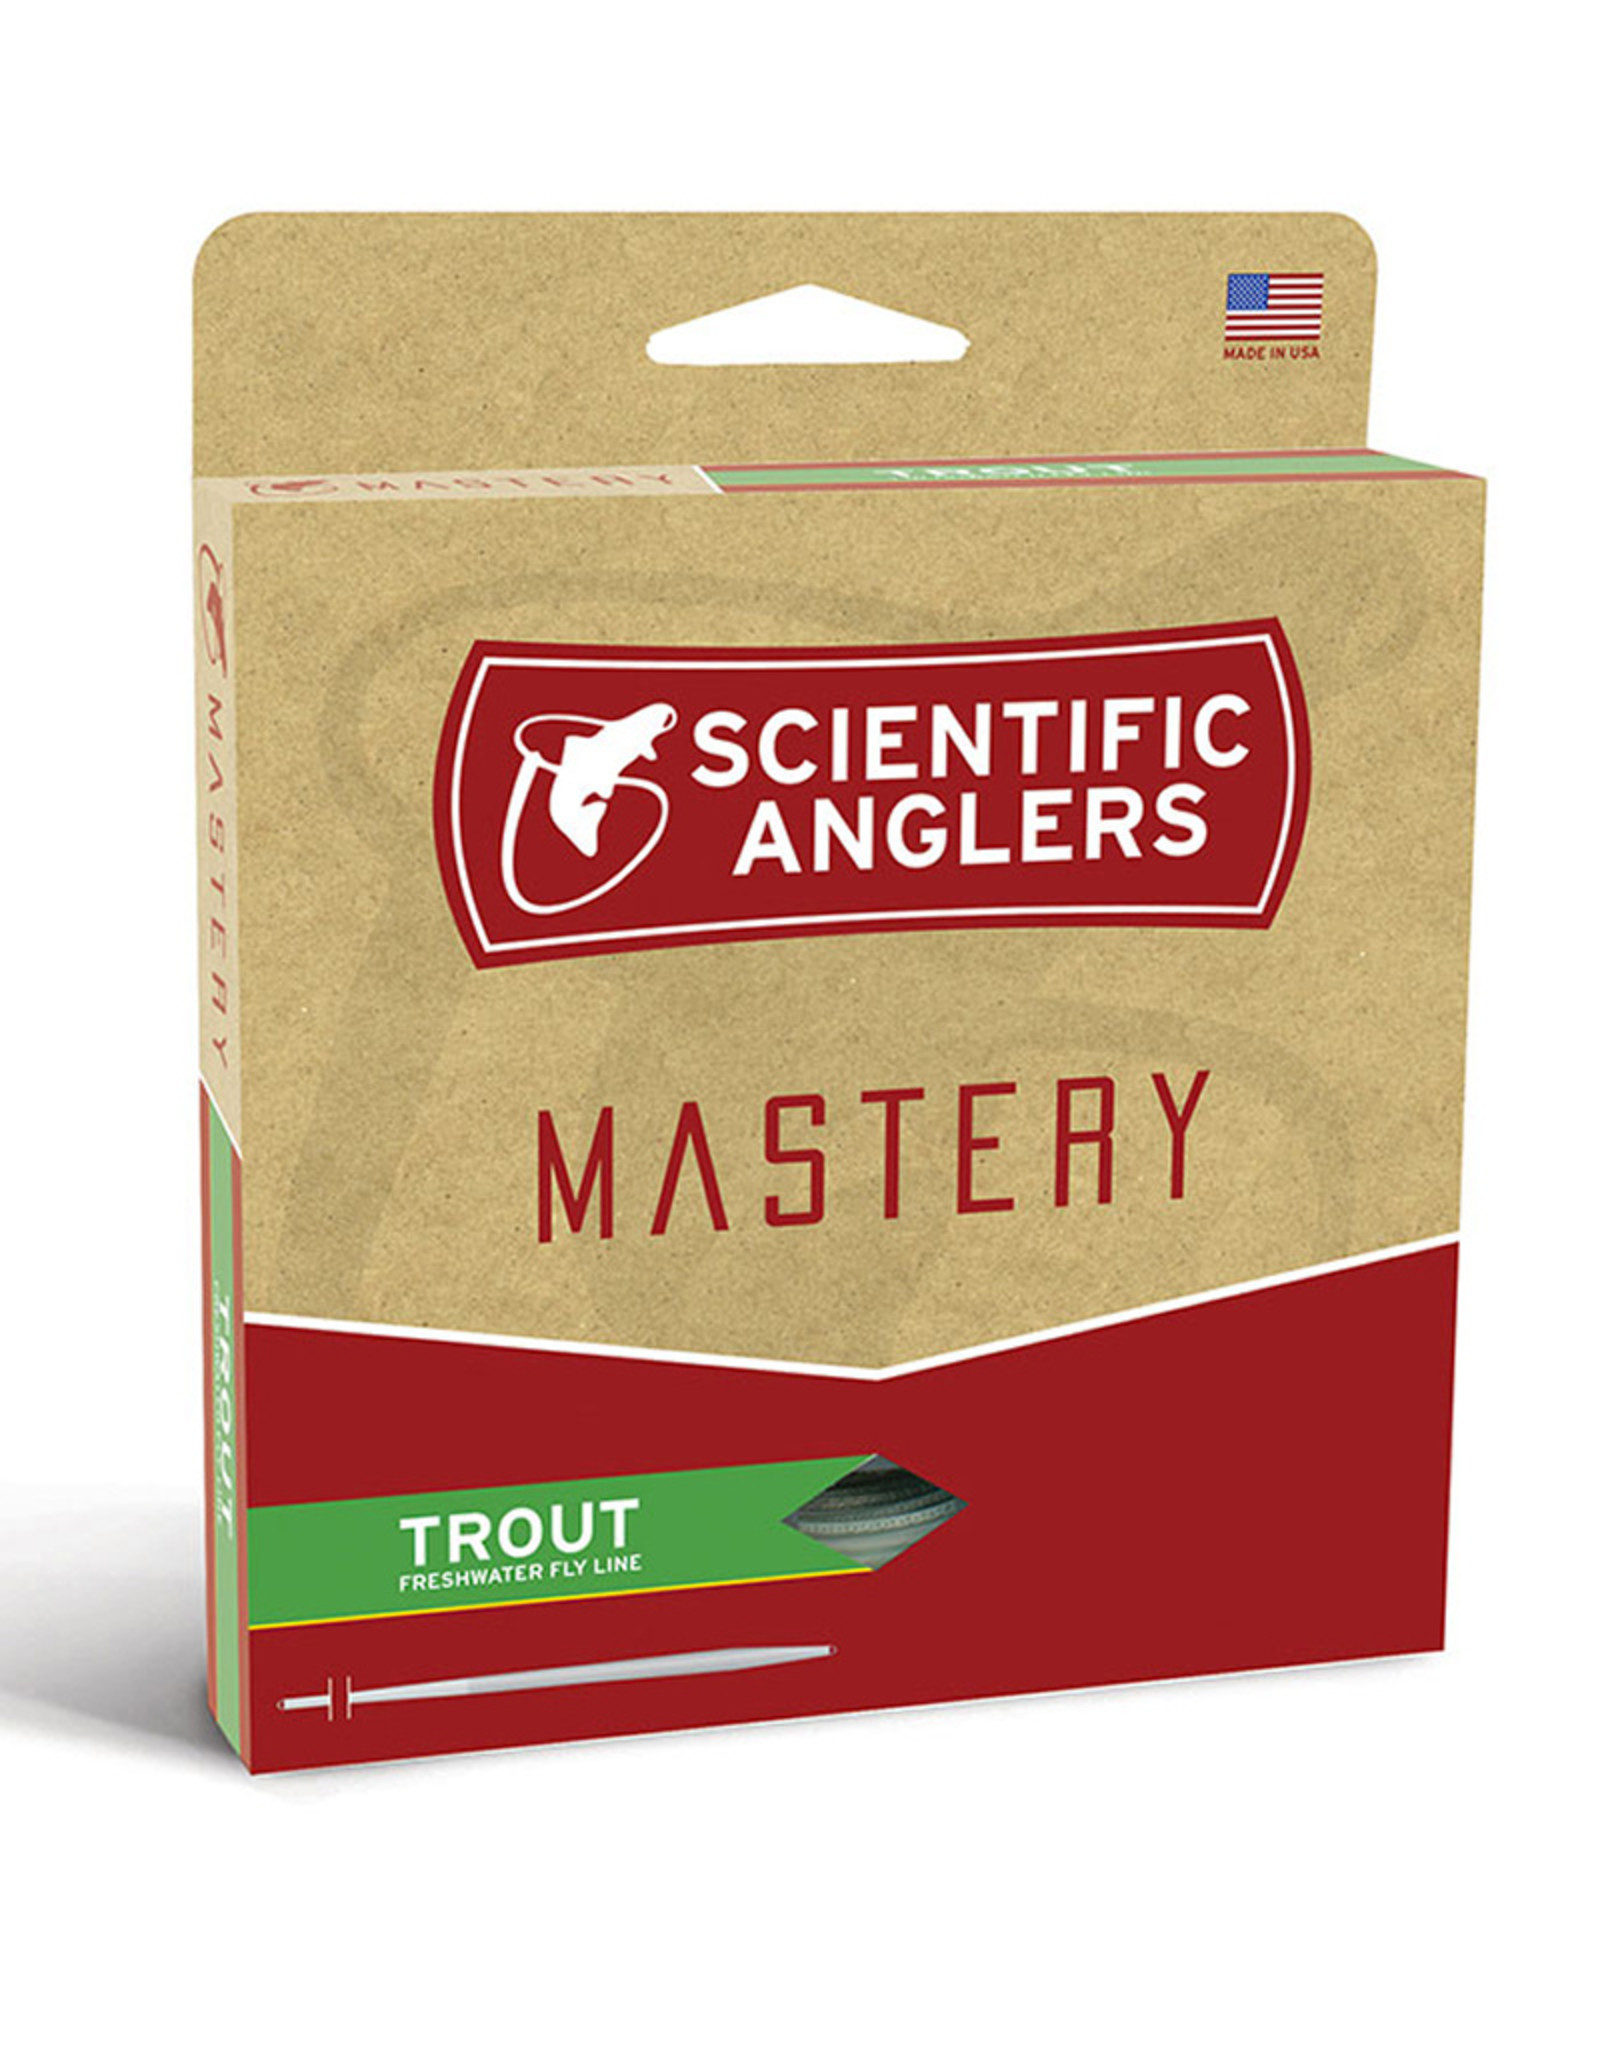 Scientific Anglers Mastery Trout